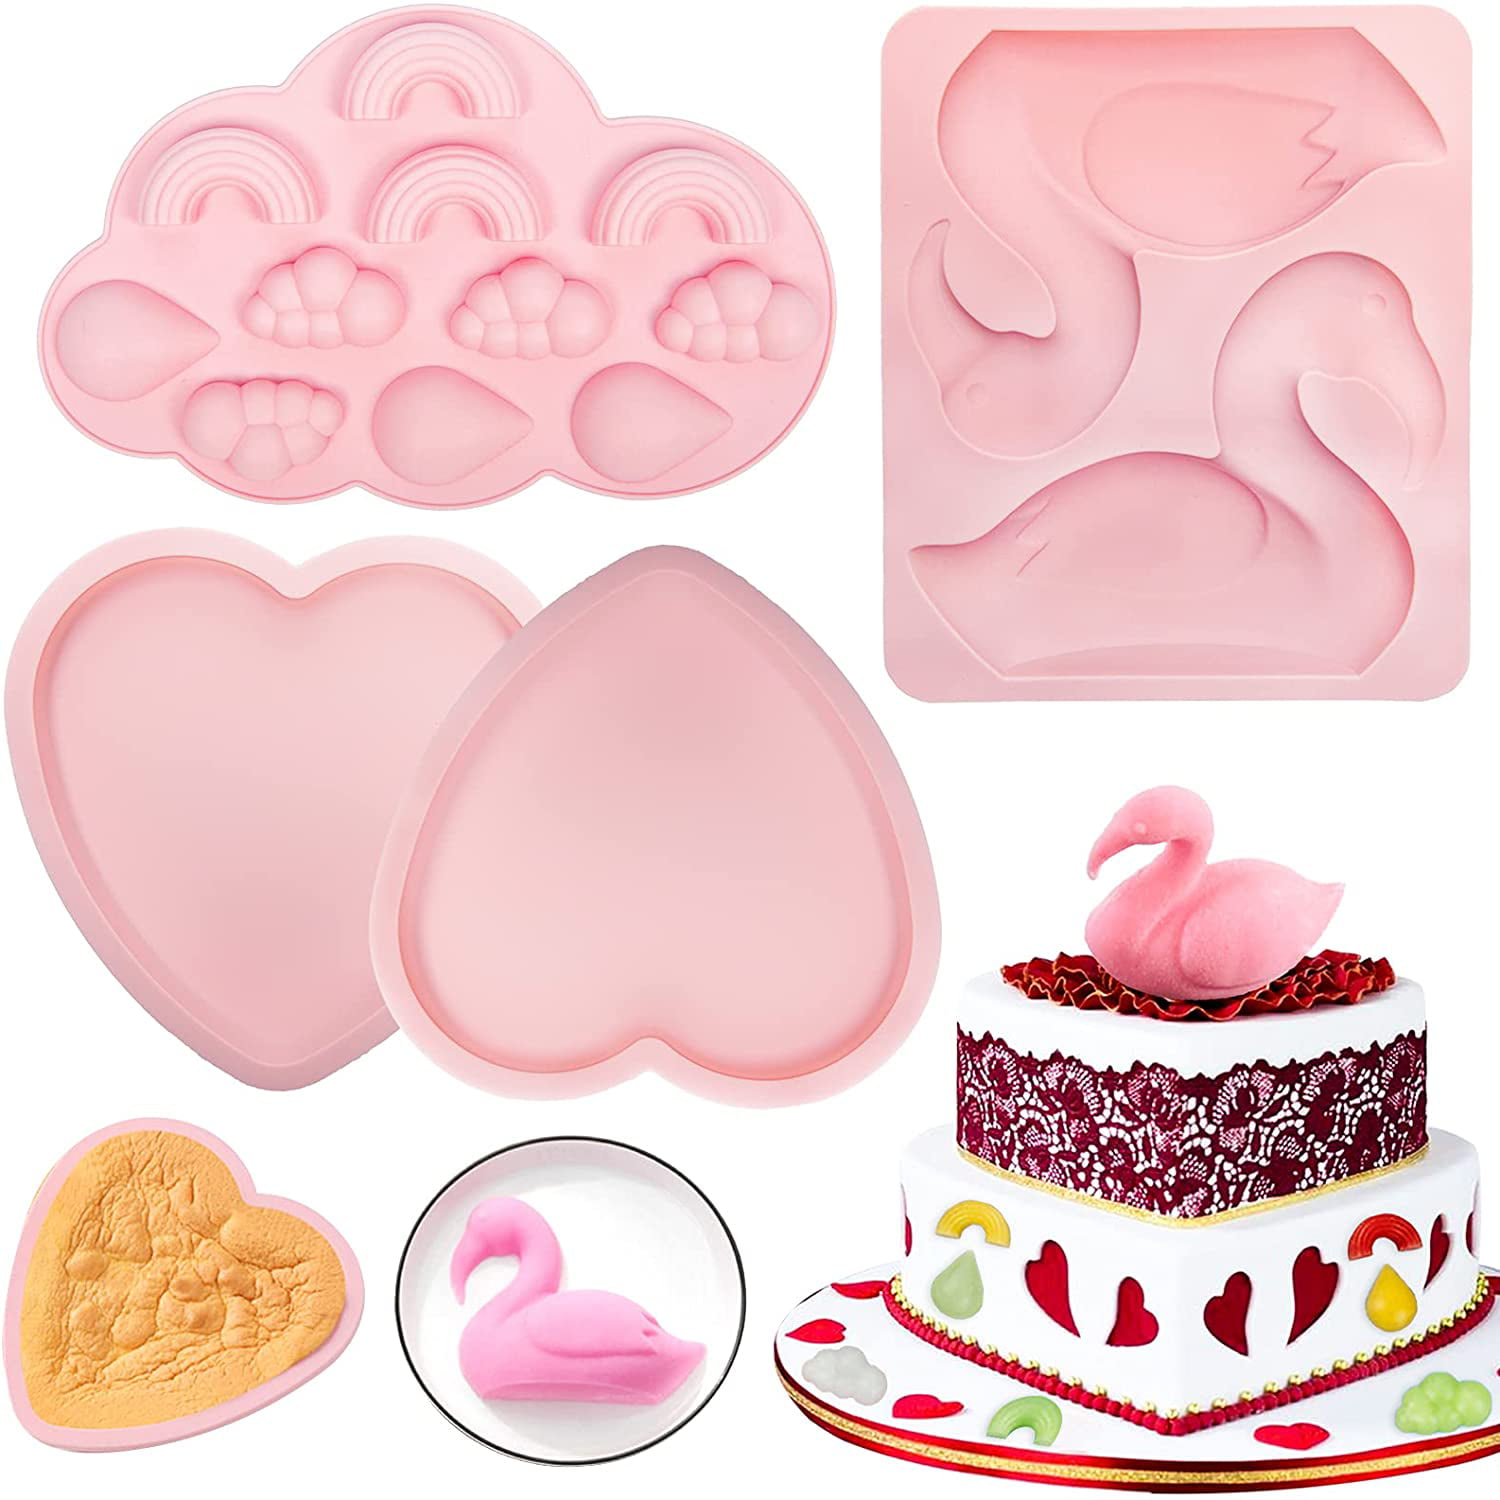 Silicone Jelly Chocolate Tray Cake Candy Cookie Cube Mold Pastry DIY Baking Mold 